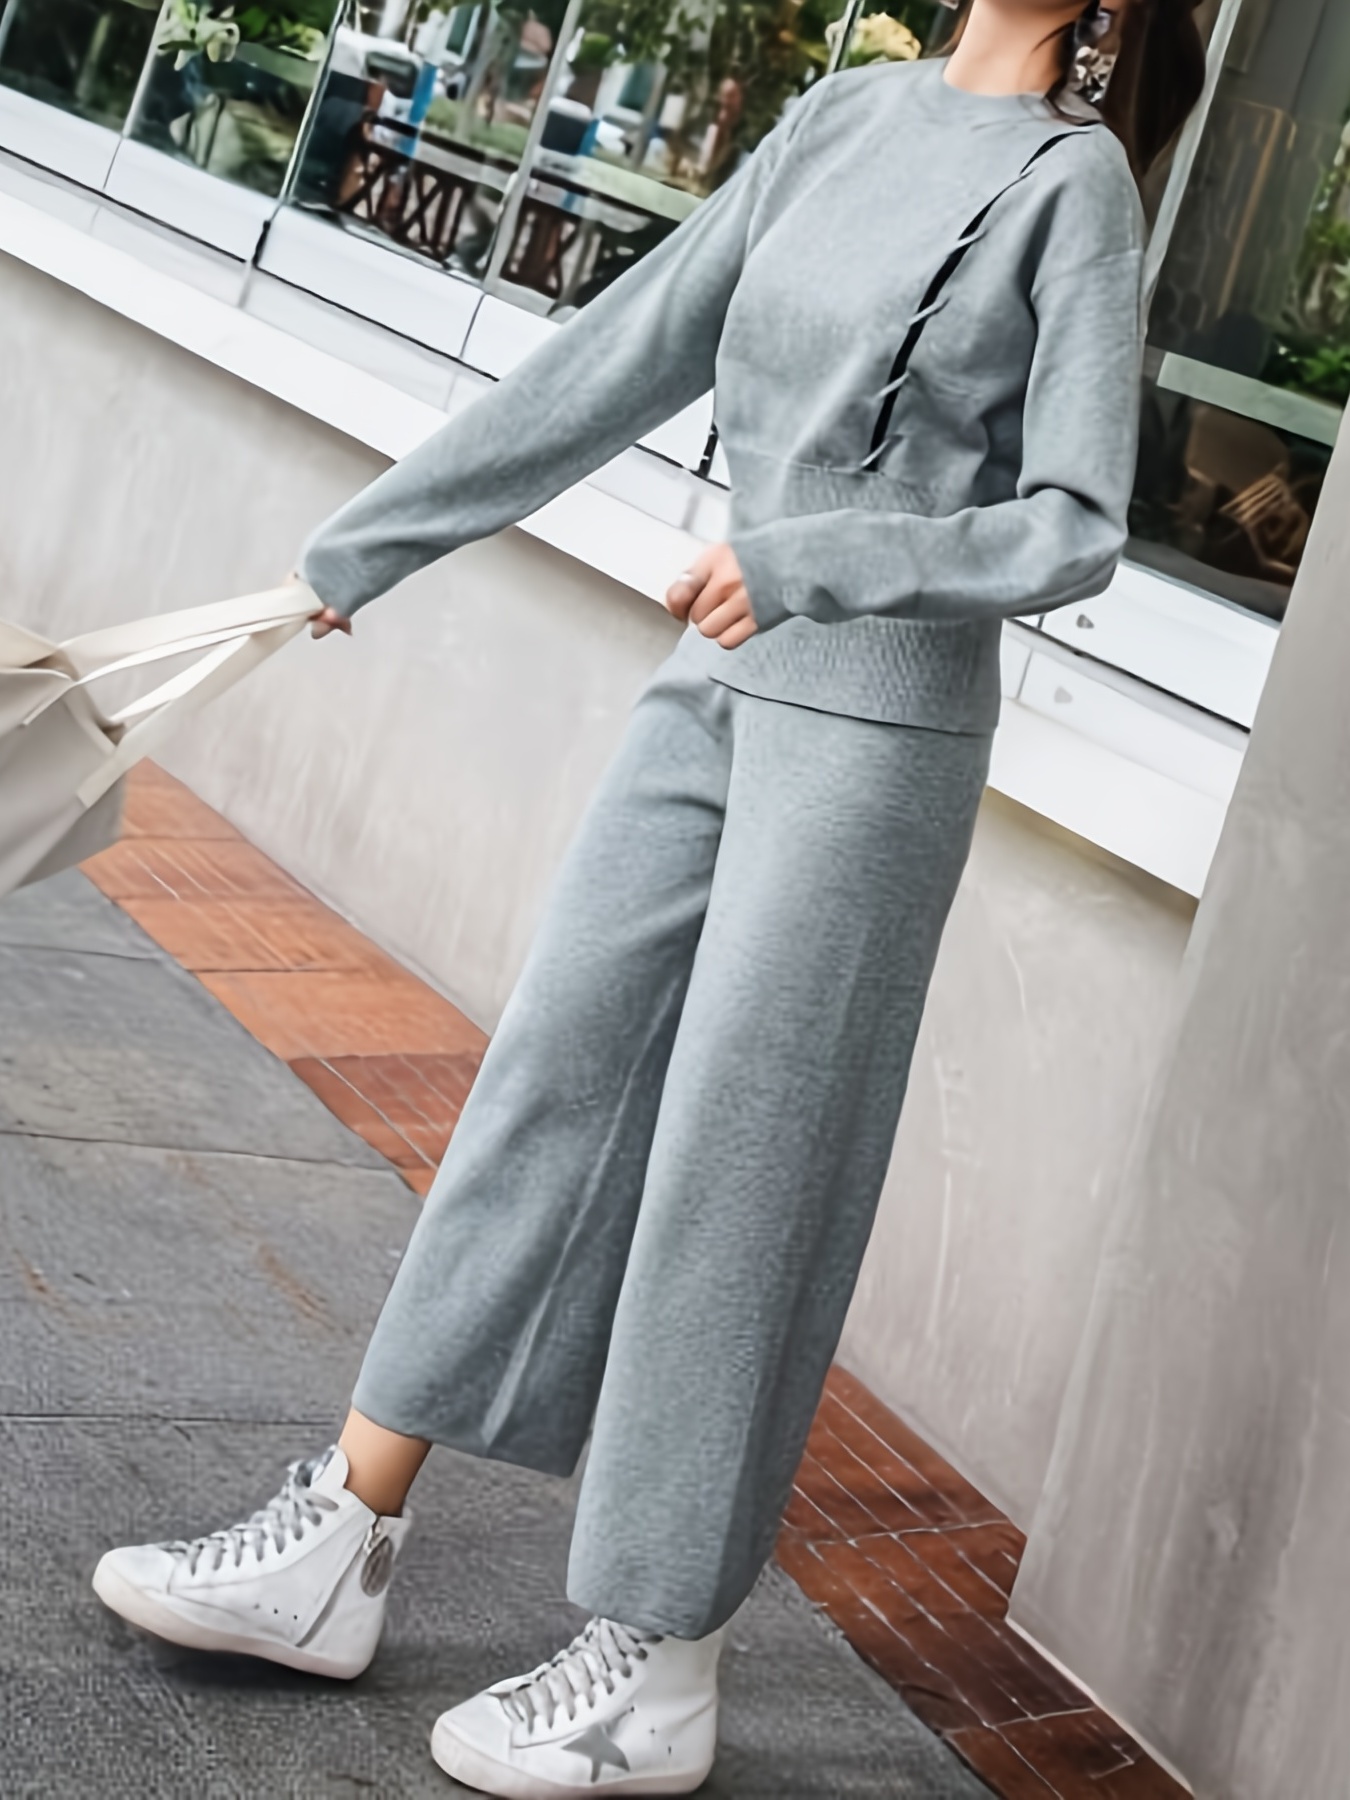 YWDJ 2 Piece Outfits for Women Pants Sets Long Sleeved Plain Knitted Casual  Two-piece Blouse Pants Knitting Sweater Gray XL 